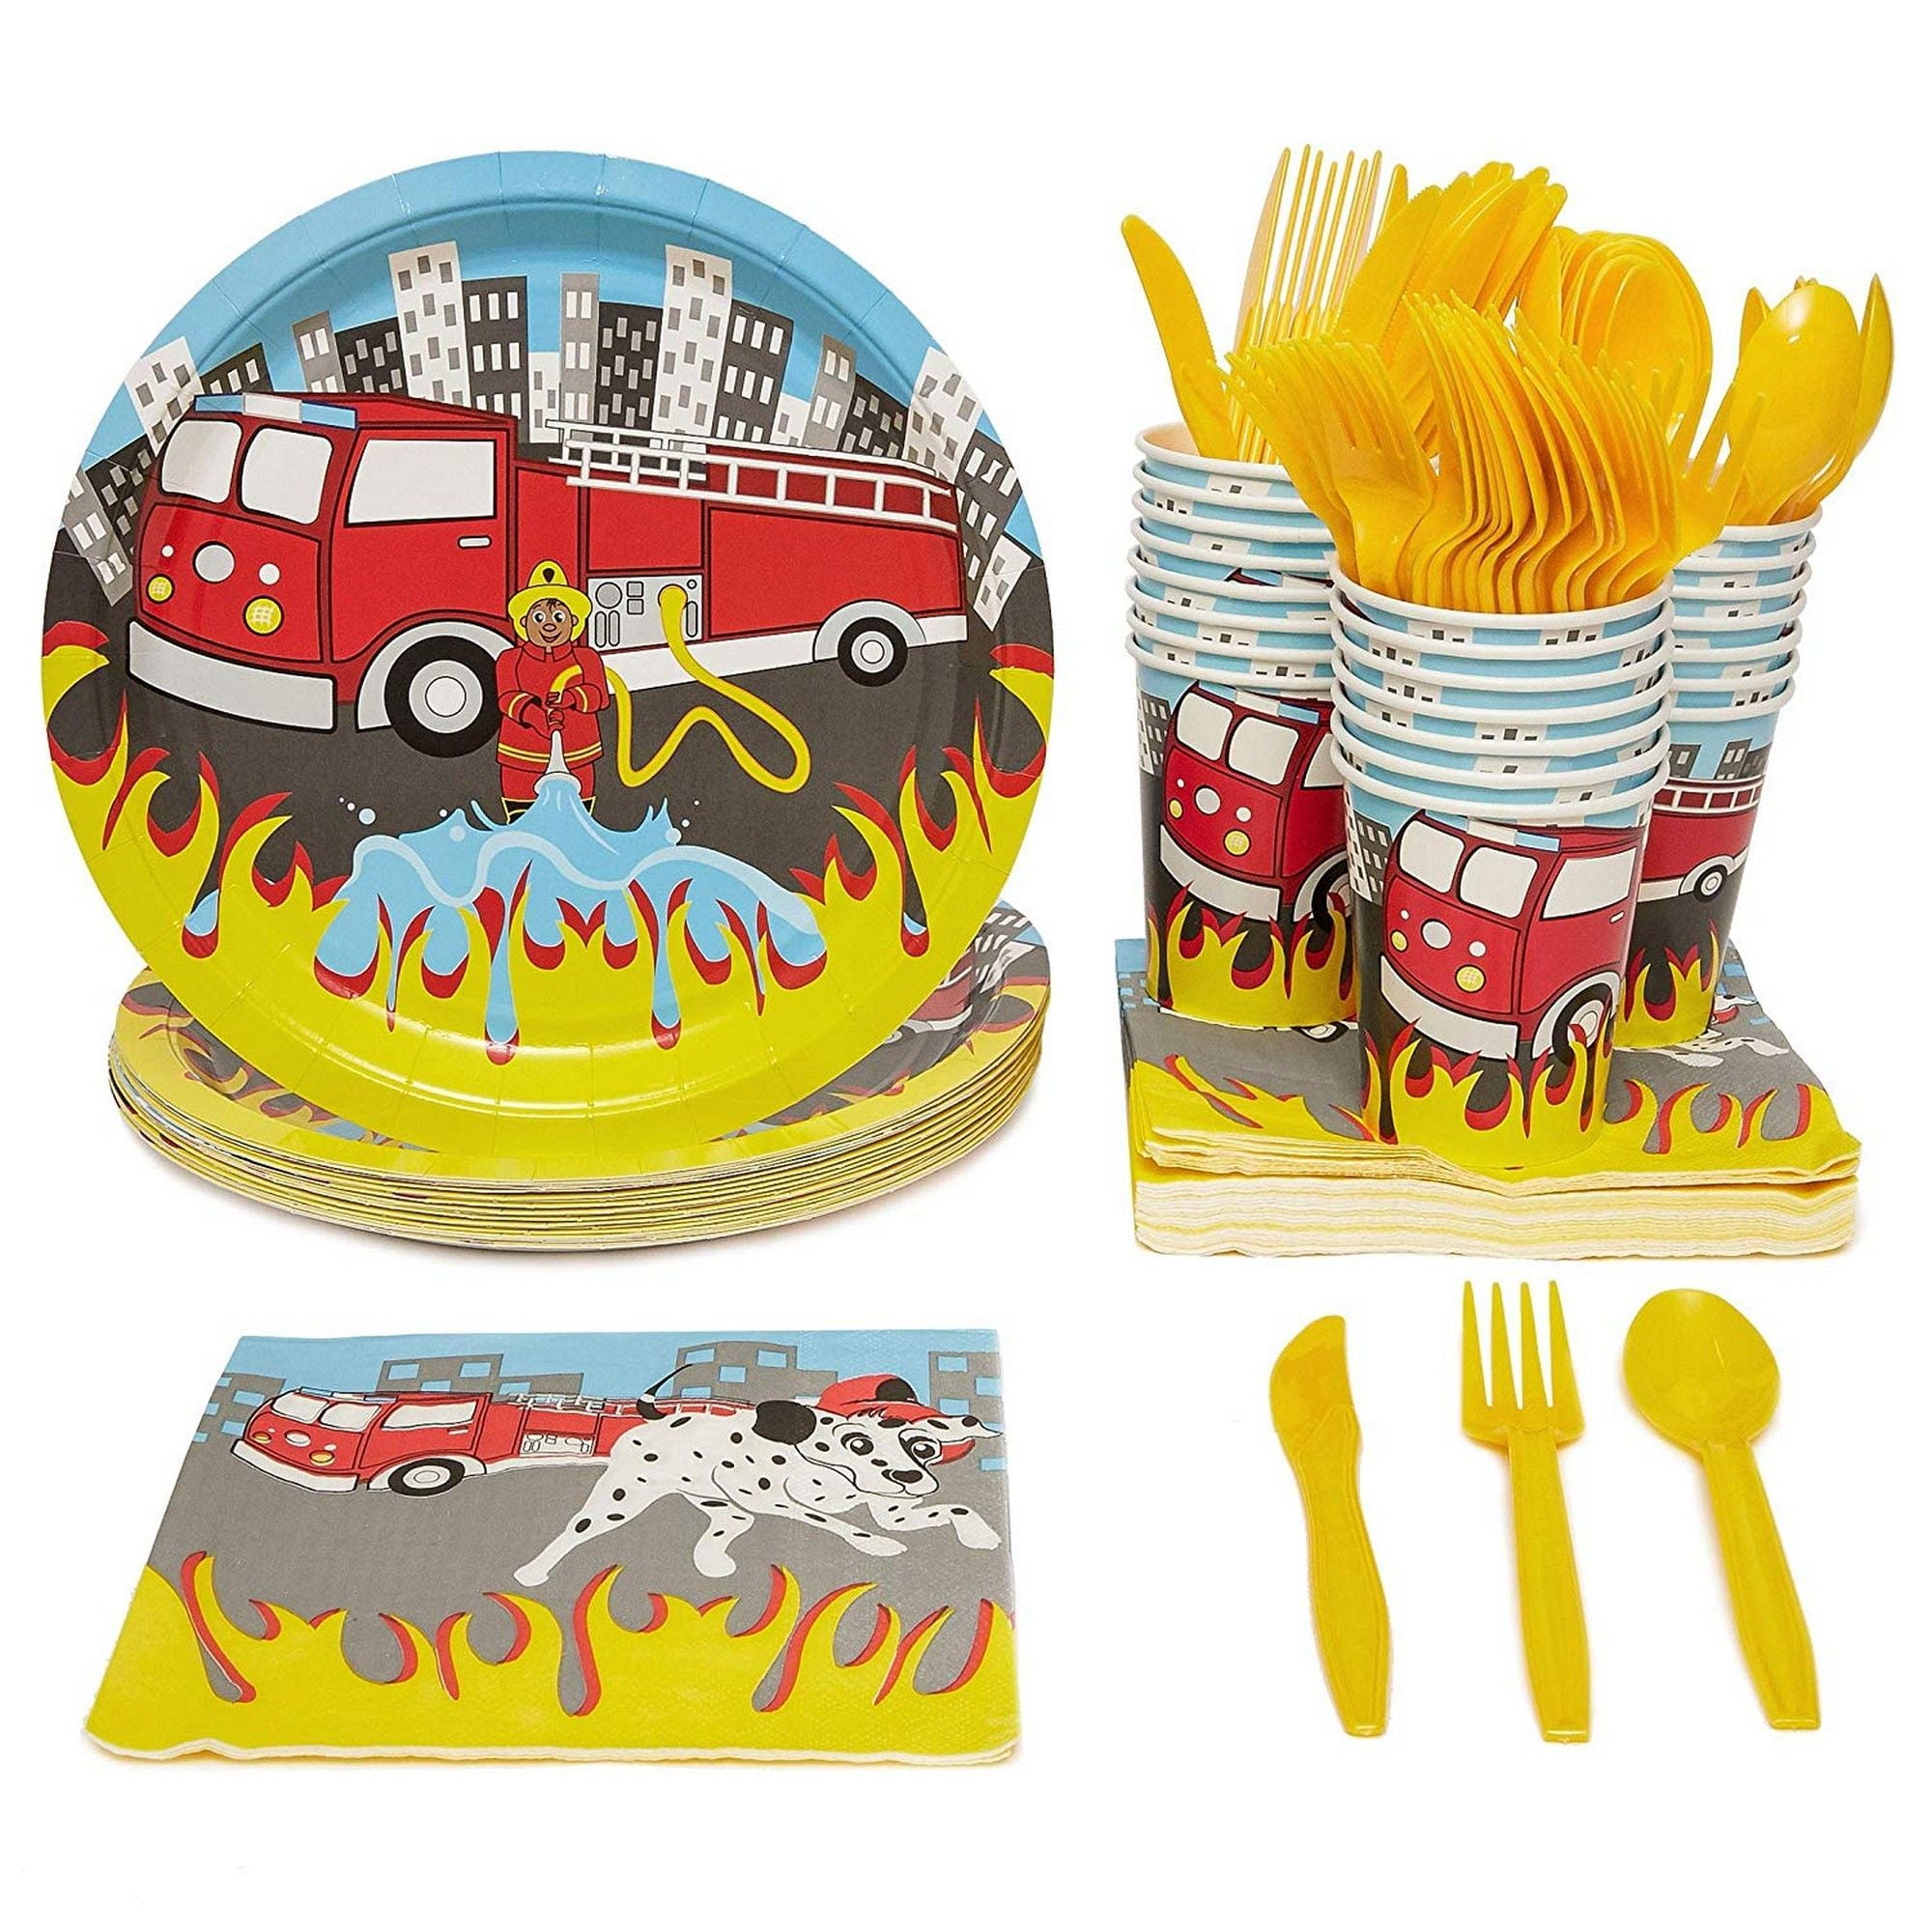 Dessert Plates Cieovo Fire Truck Tableware Set for 16 Guests Including Dinner Plates Cups for Firetruck Theme Baby Shower Family Activity Kids Birthday Fireman Party Supplies Decorations Lunch Napkins